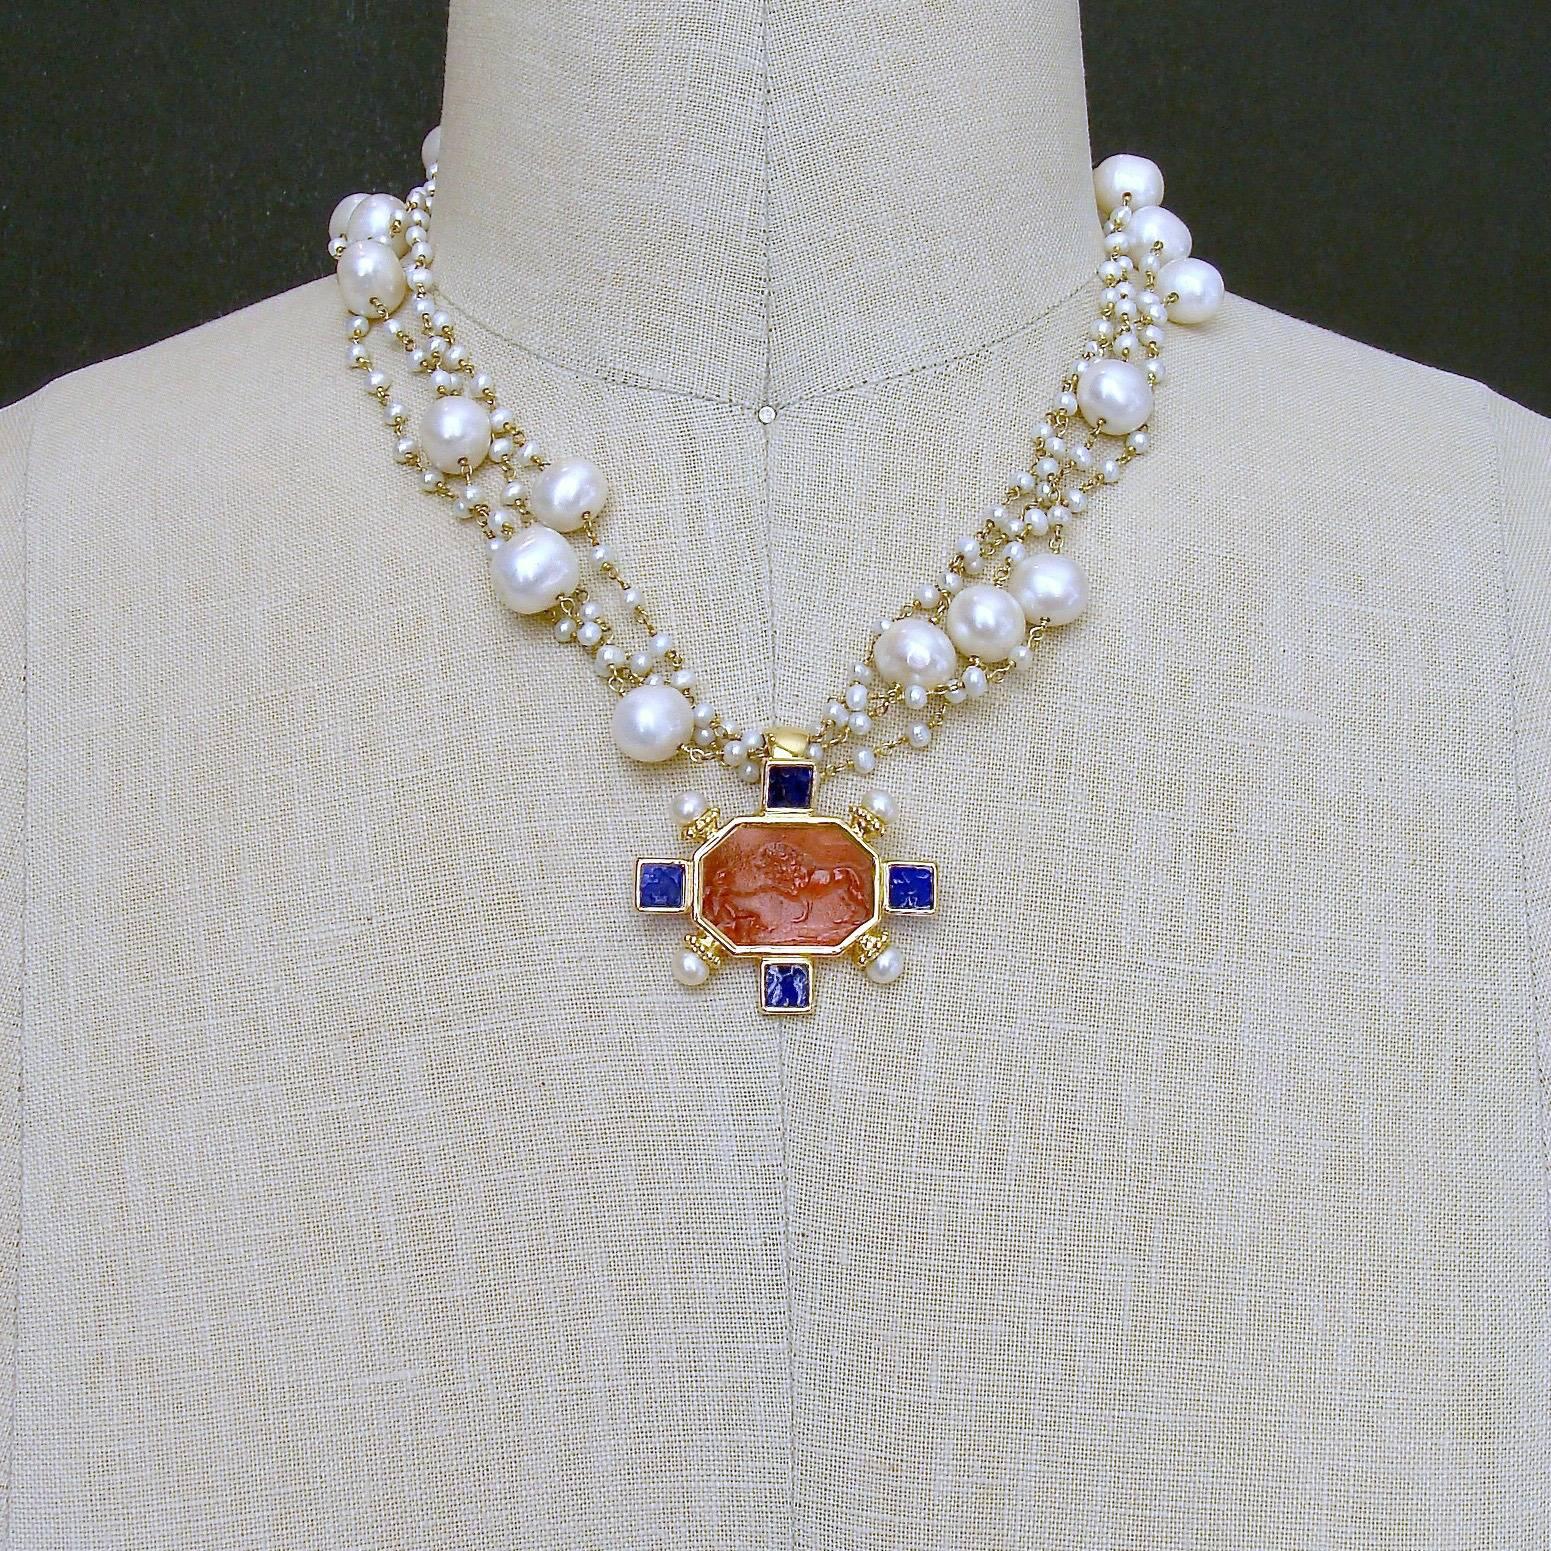 Women's Freshwater Pearls Salmon Pink Cobalt Blue Venetian Glass Intaglio Cameo Necklace